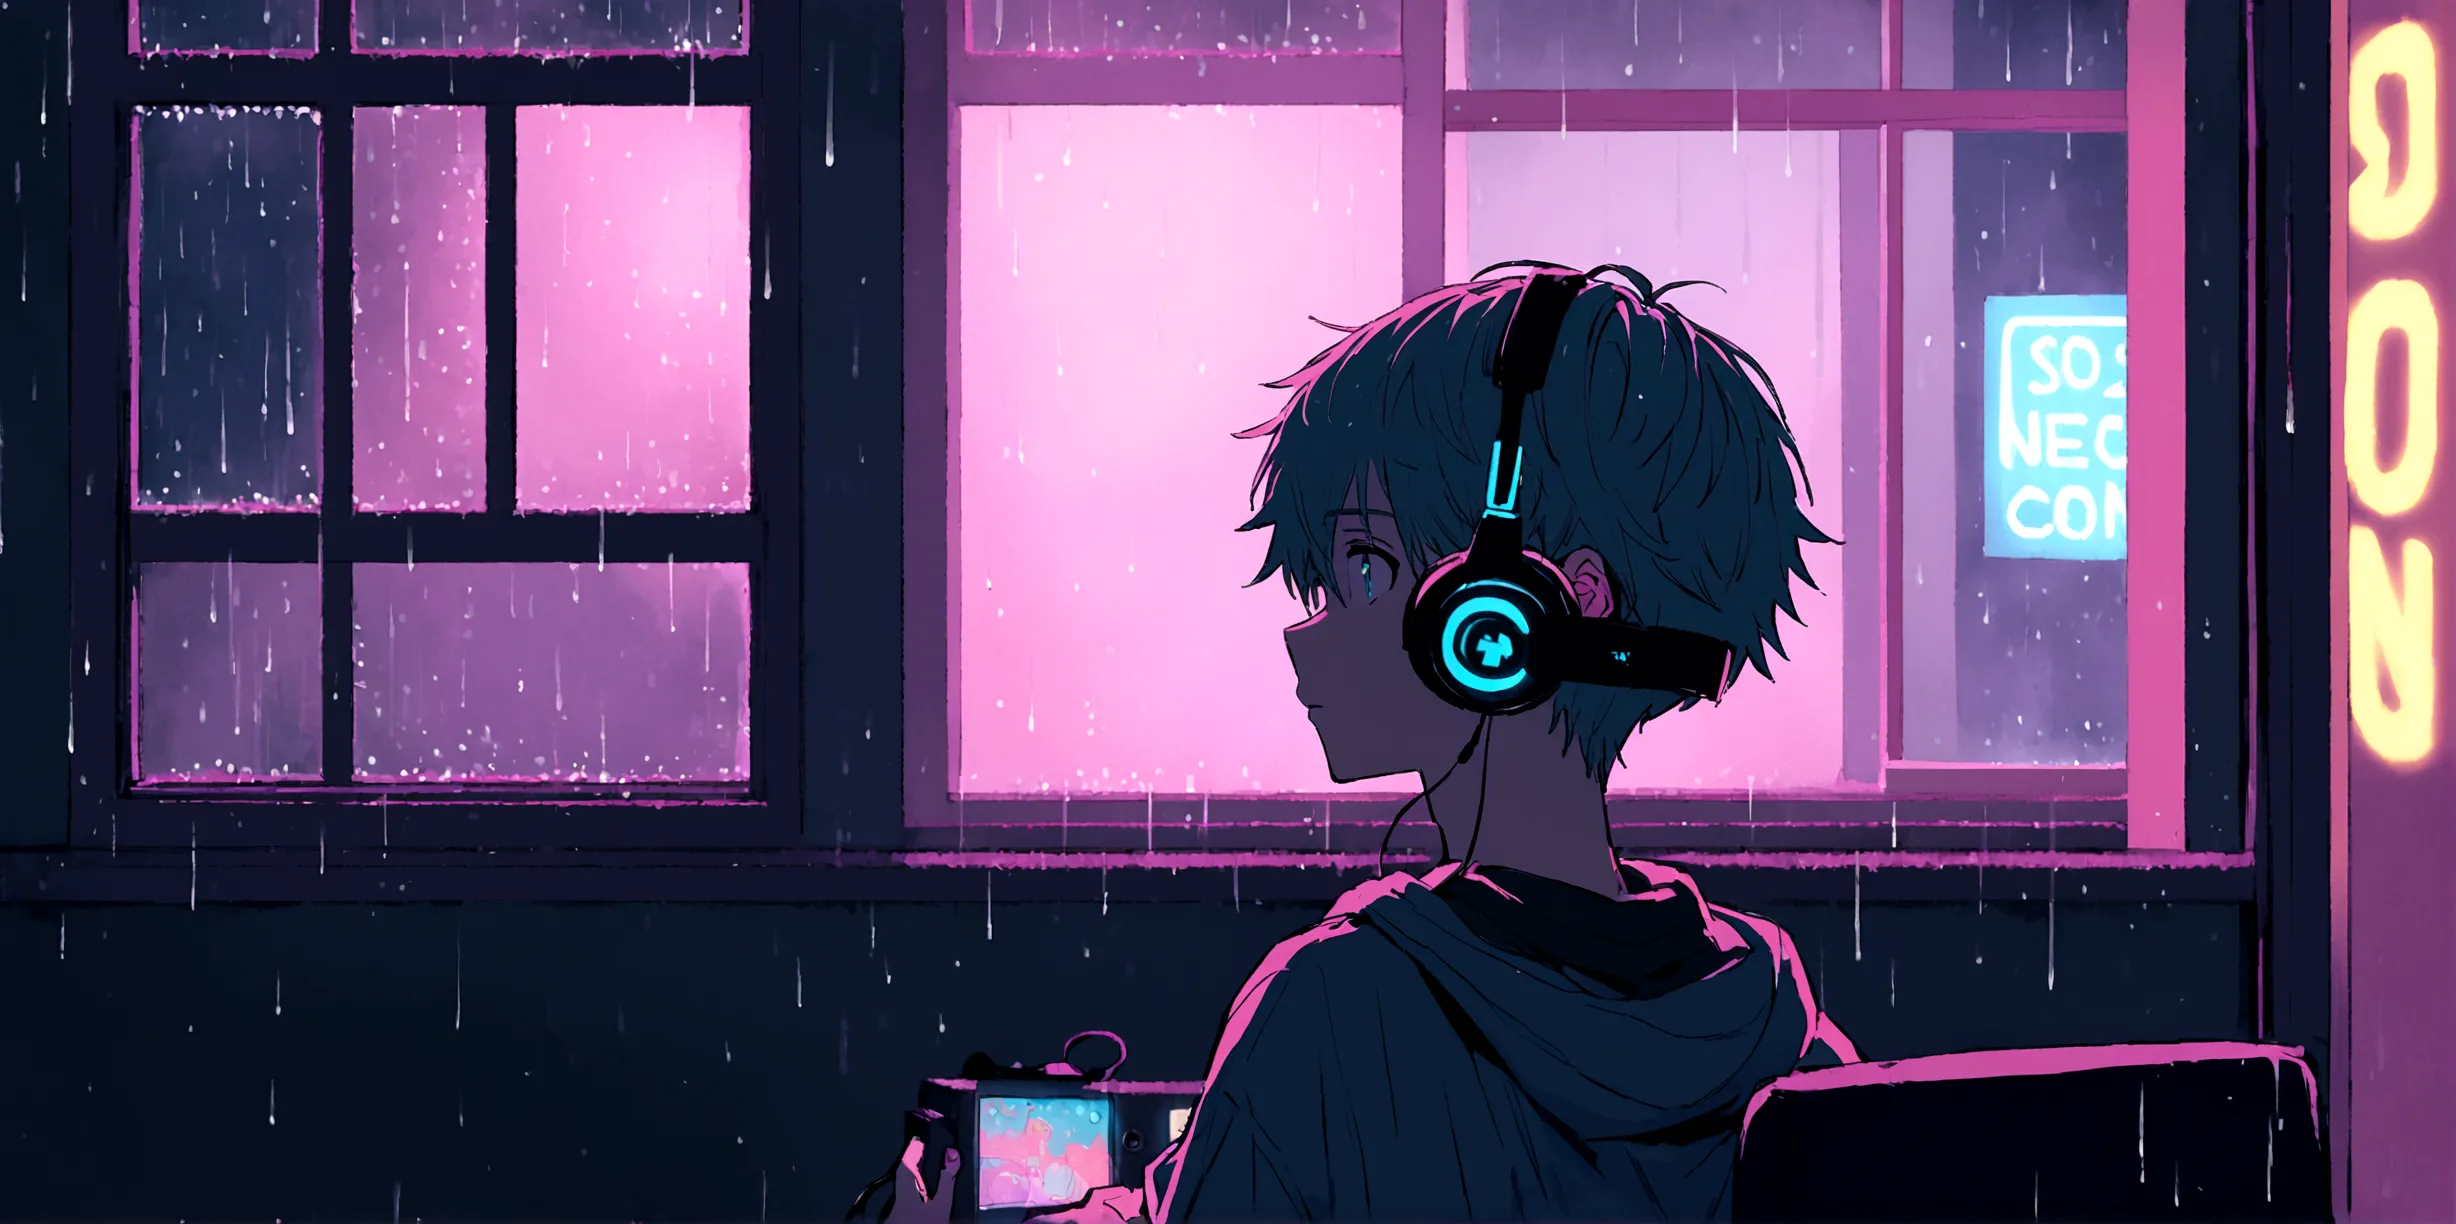 An 16 years old gamer anime boy, looking at computer, so many neon lights, night, rain outside, cozy room, closed window, boy an...